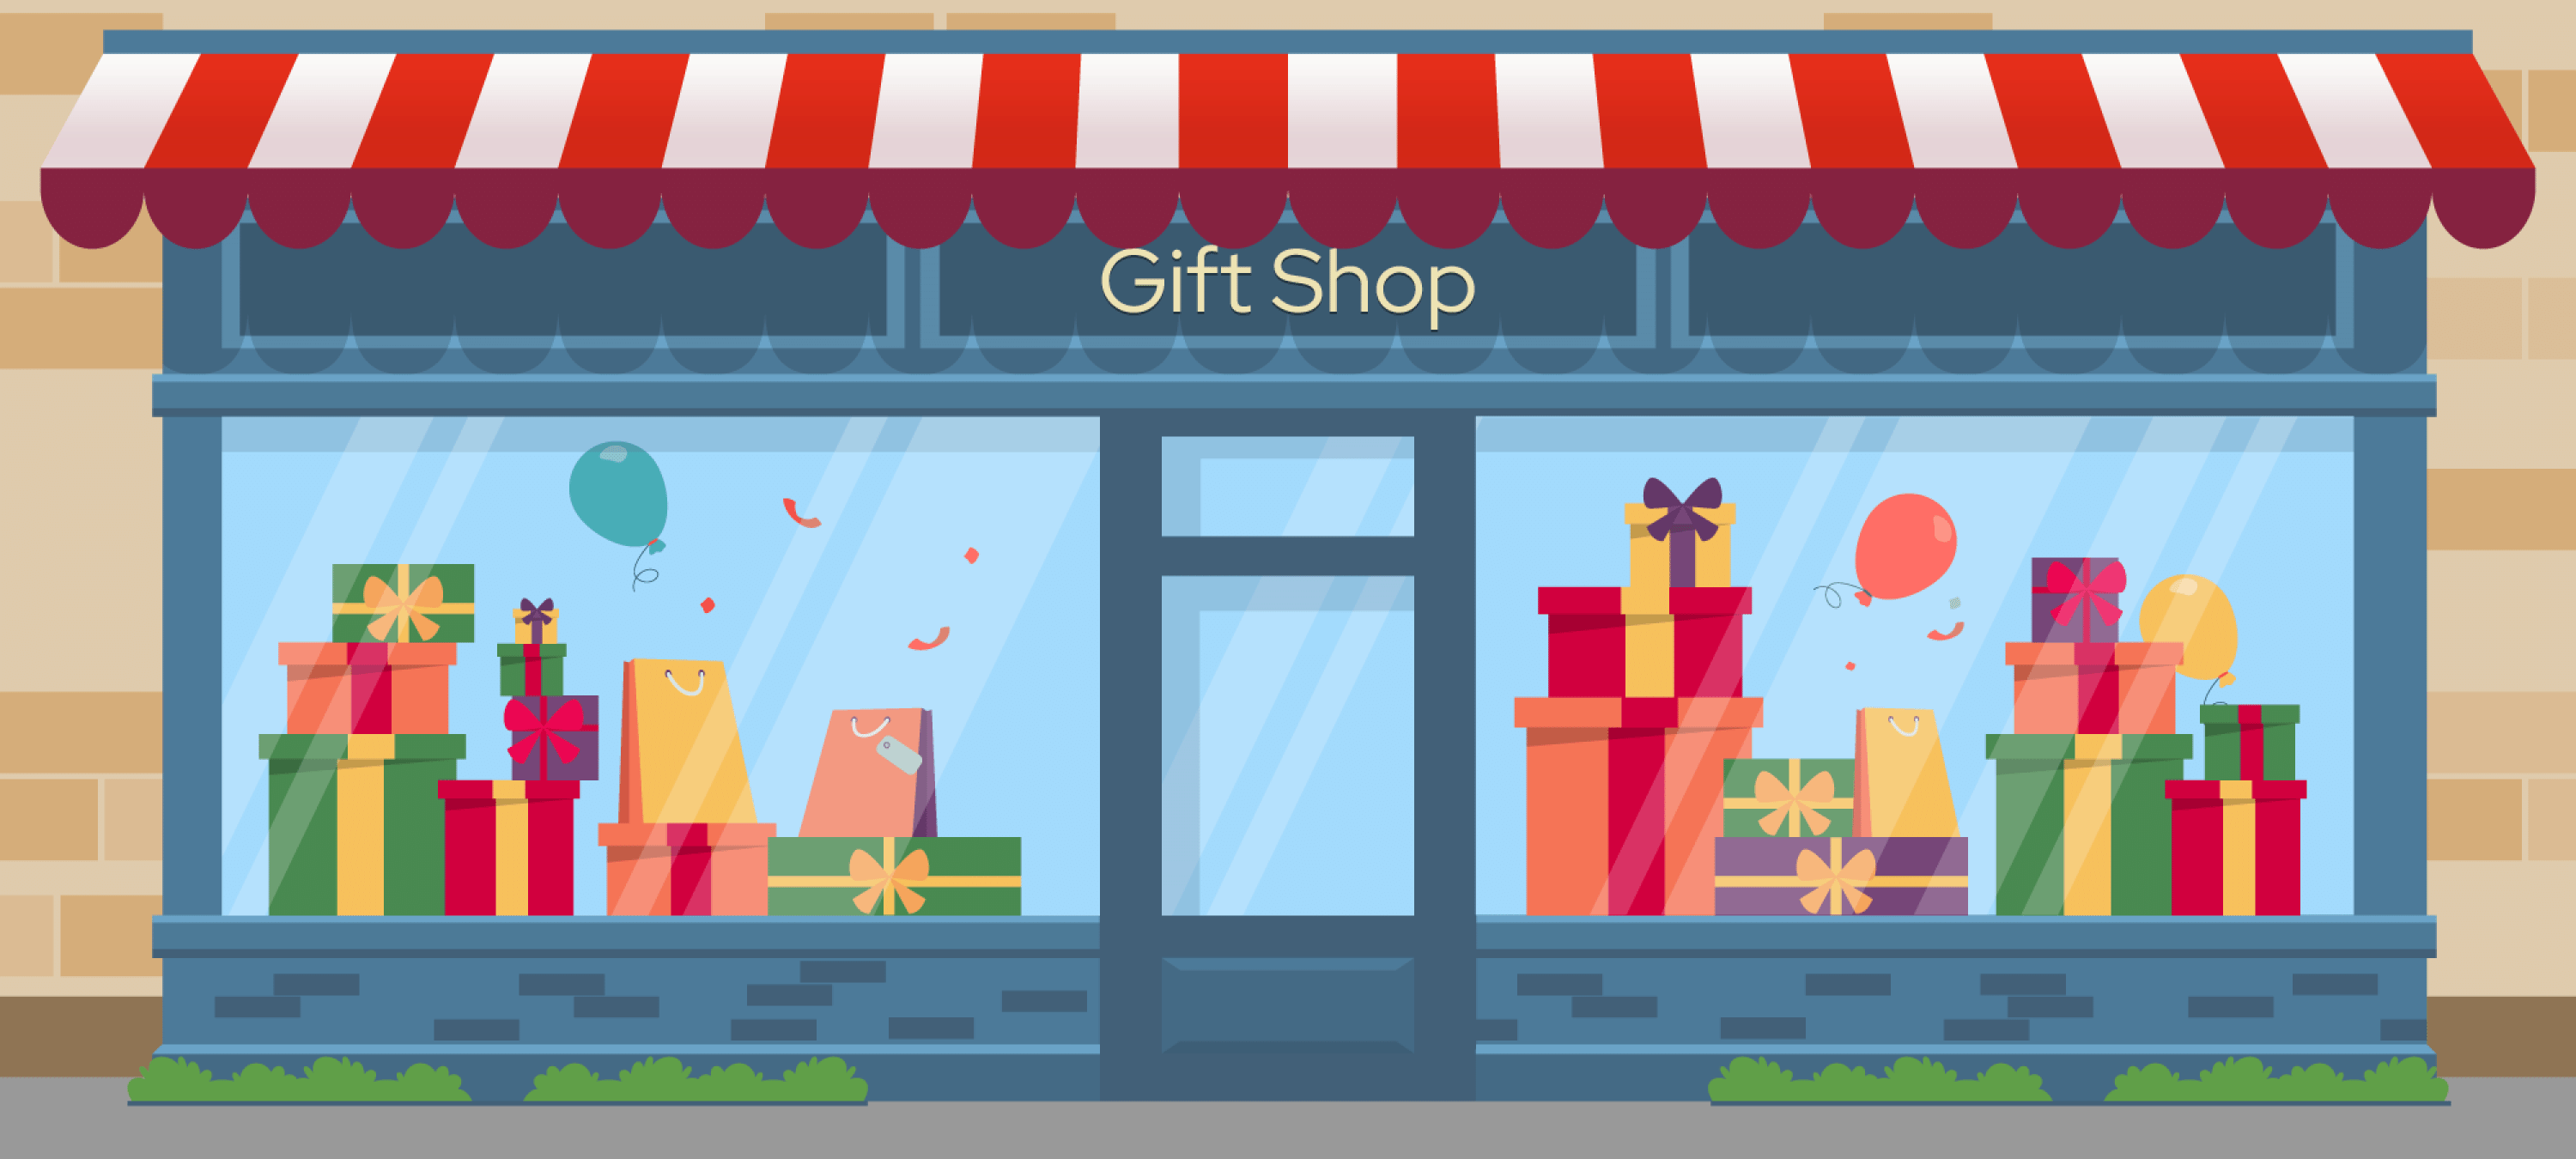 Great Gift Shop Ideas – Top Selling Souvenirs & Merchandise for Zoos, Parks, Casinos, Hotels & More